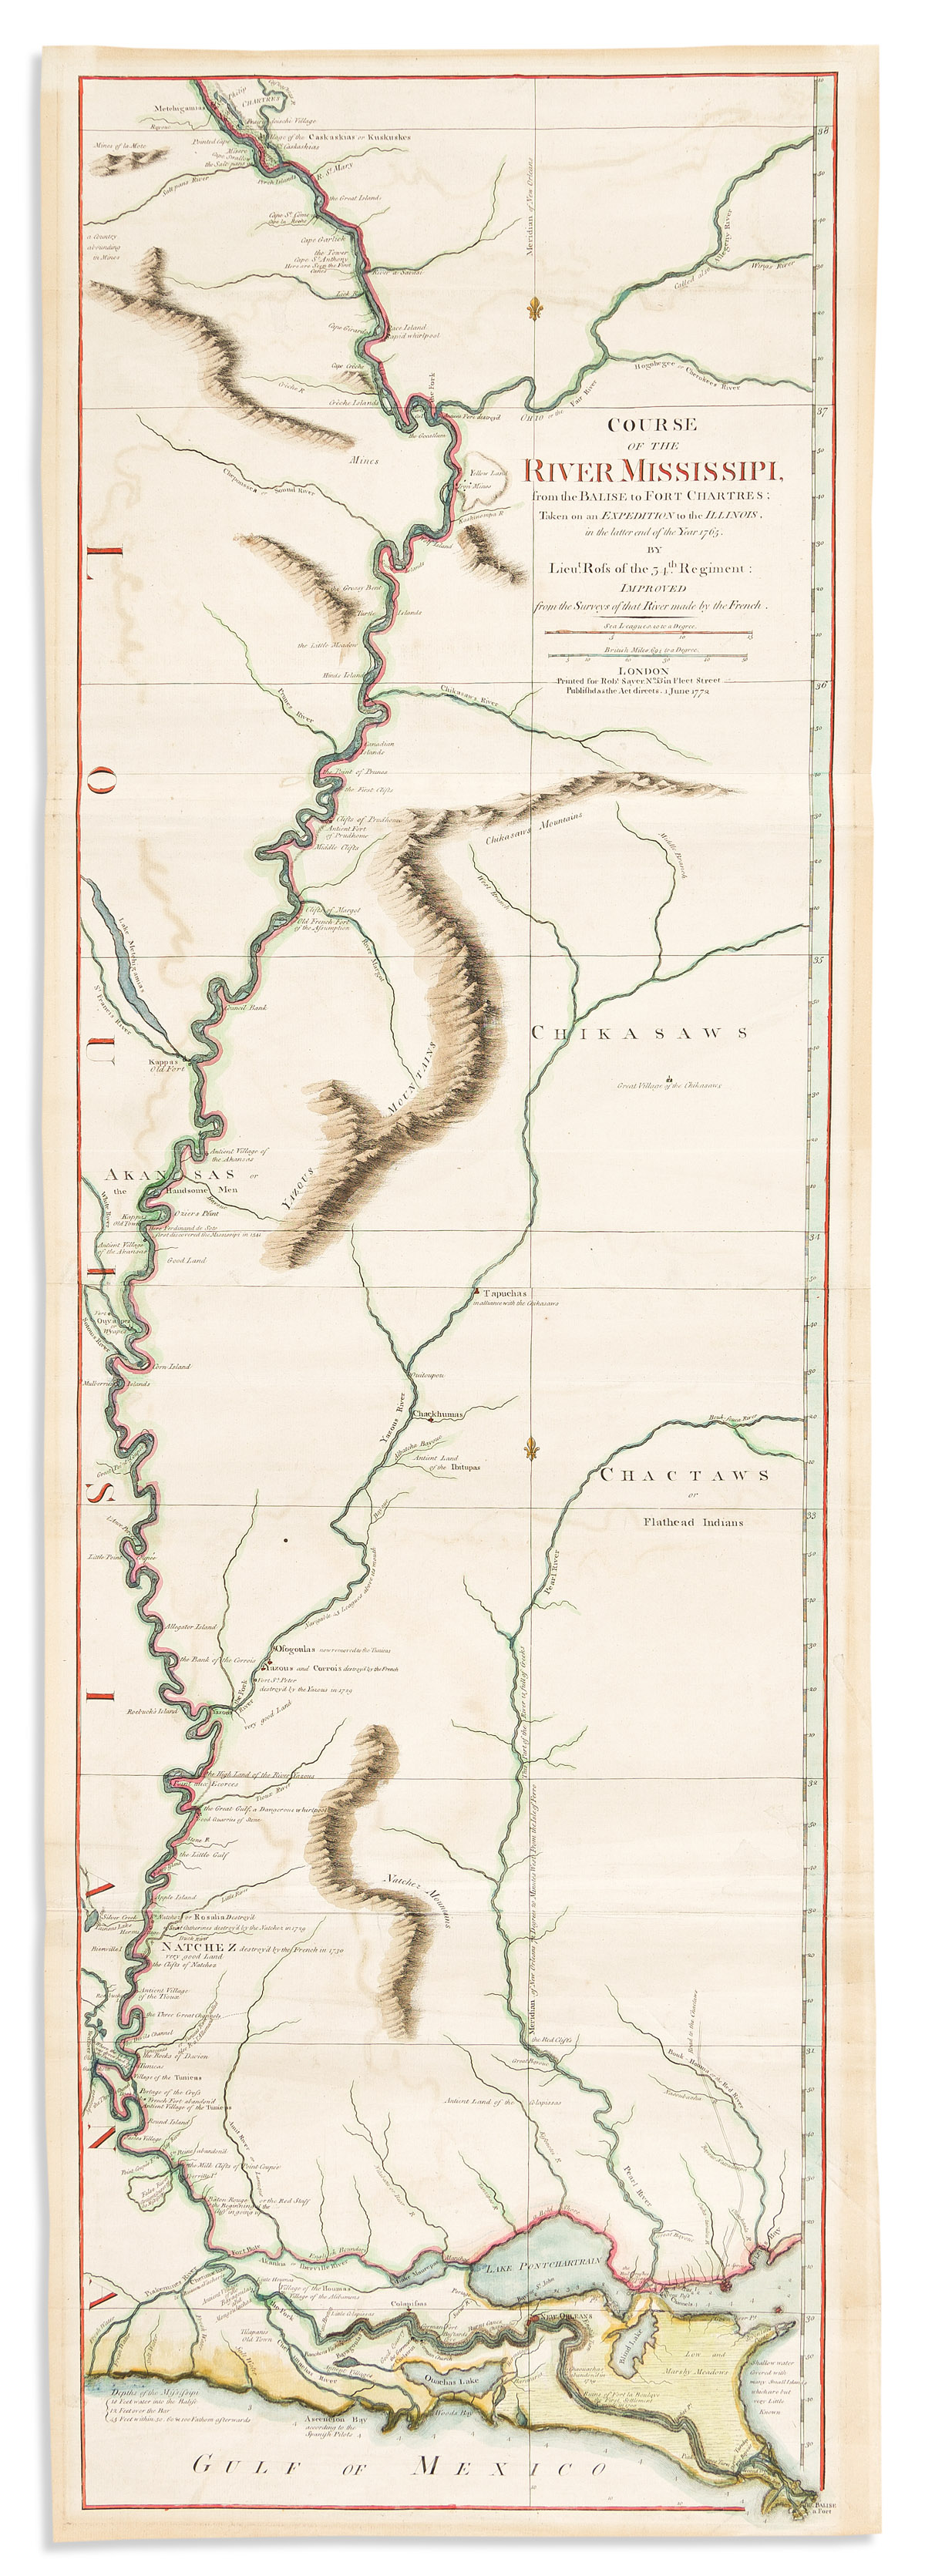 (MISSISSIPPI RIVER.) John Ross. Course of the River Mississipi, From the Balise to Fort Chartres.